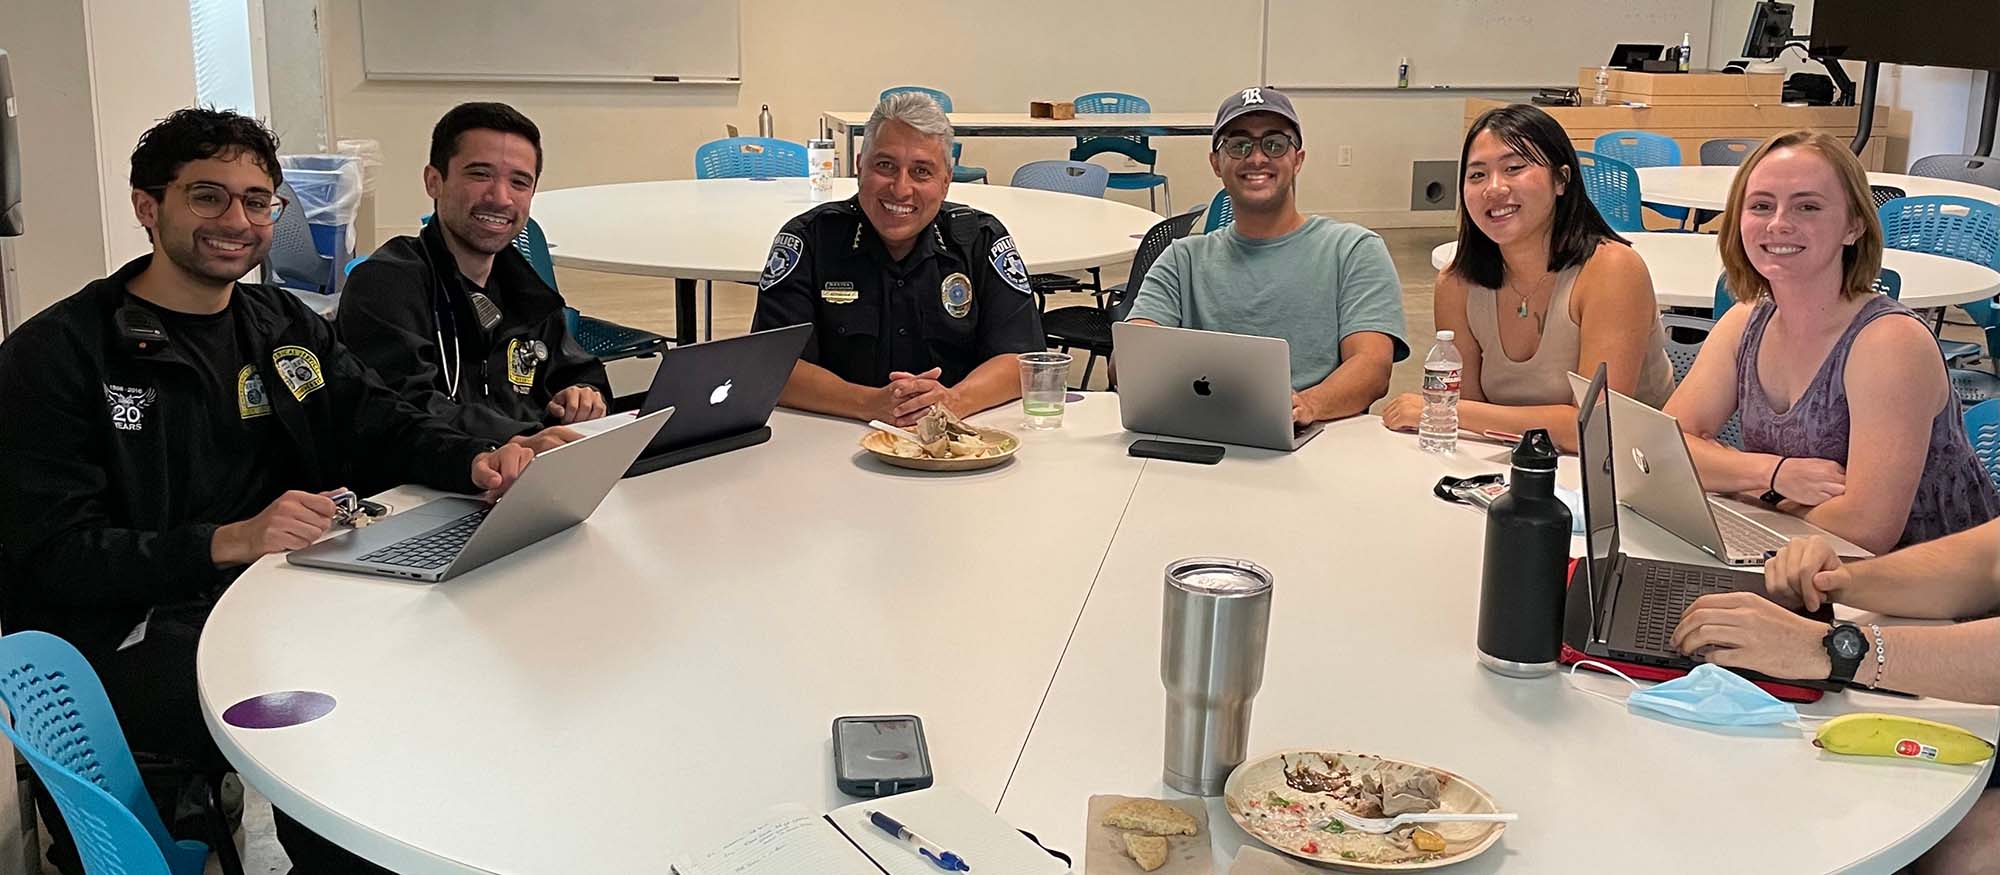 A group photo of two Rice students who are part of REMS and emergency services smiling at a table.